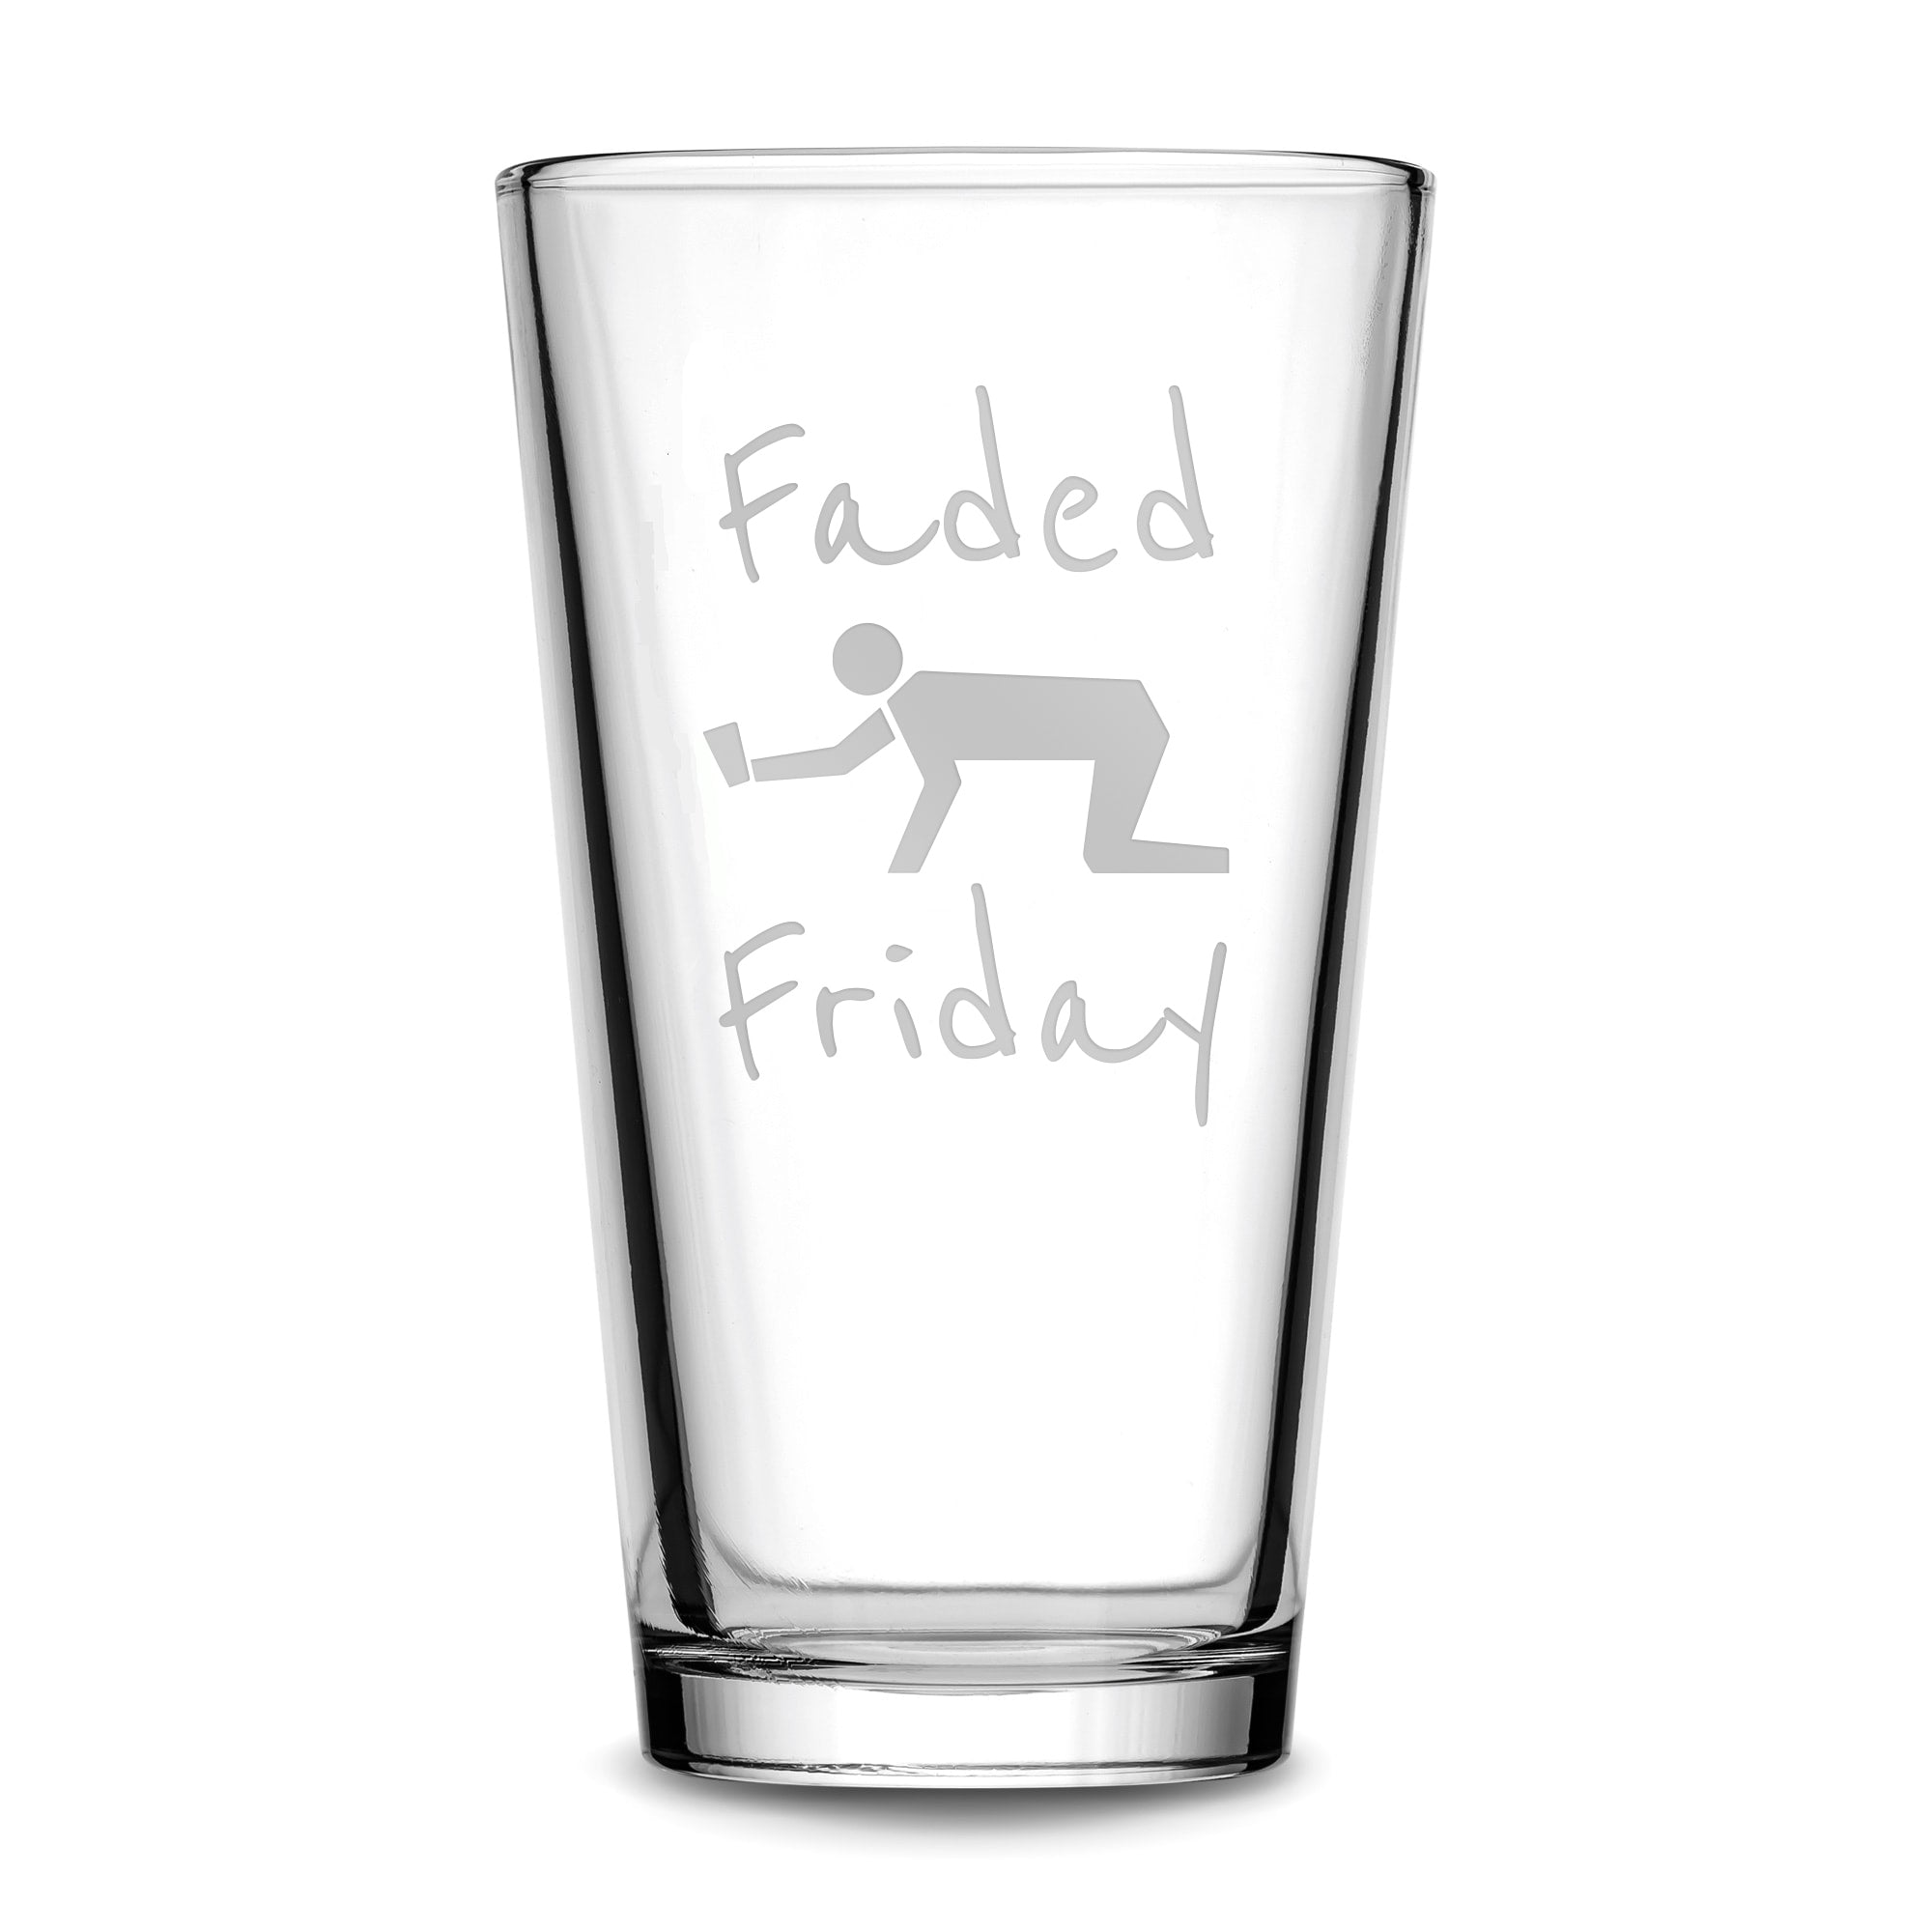 Premium Pint Glass, Faded Friday, Handmade, Handblown, Hand Etched Gifts, Sand Carved, 16oz